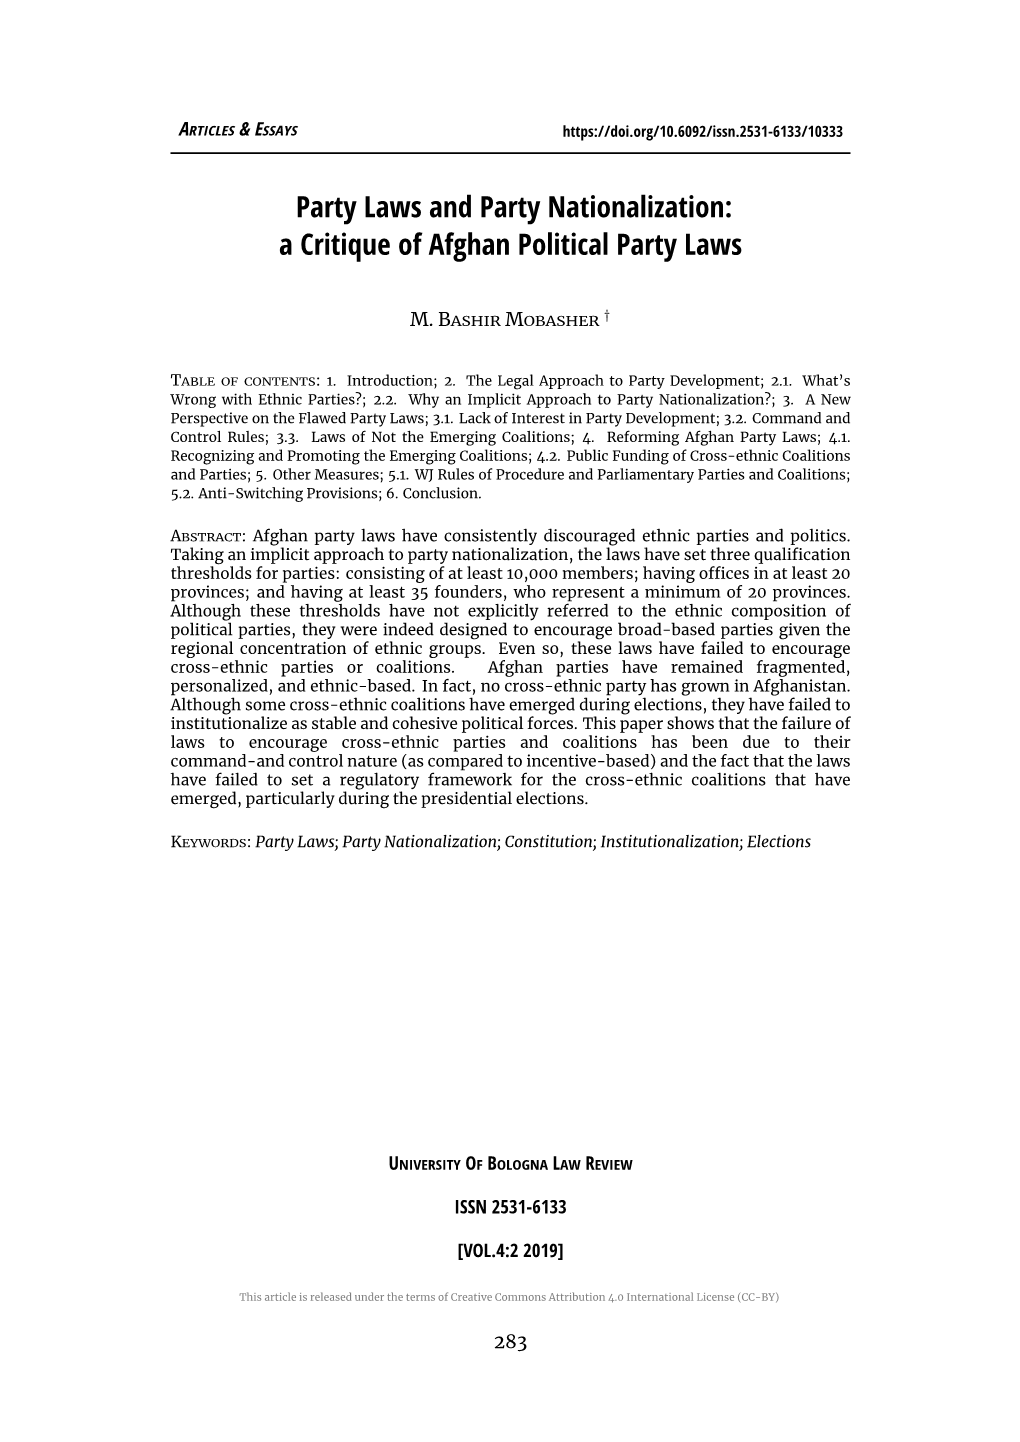 Party Laws and Party Nationalization: a Critique of Afghan Political Party Laws